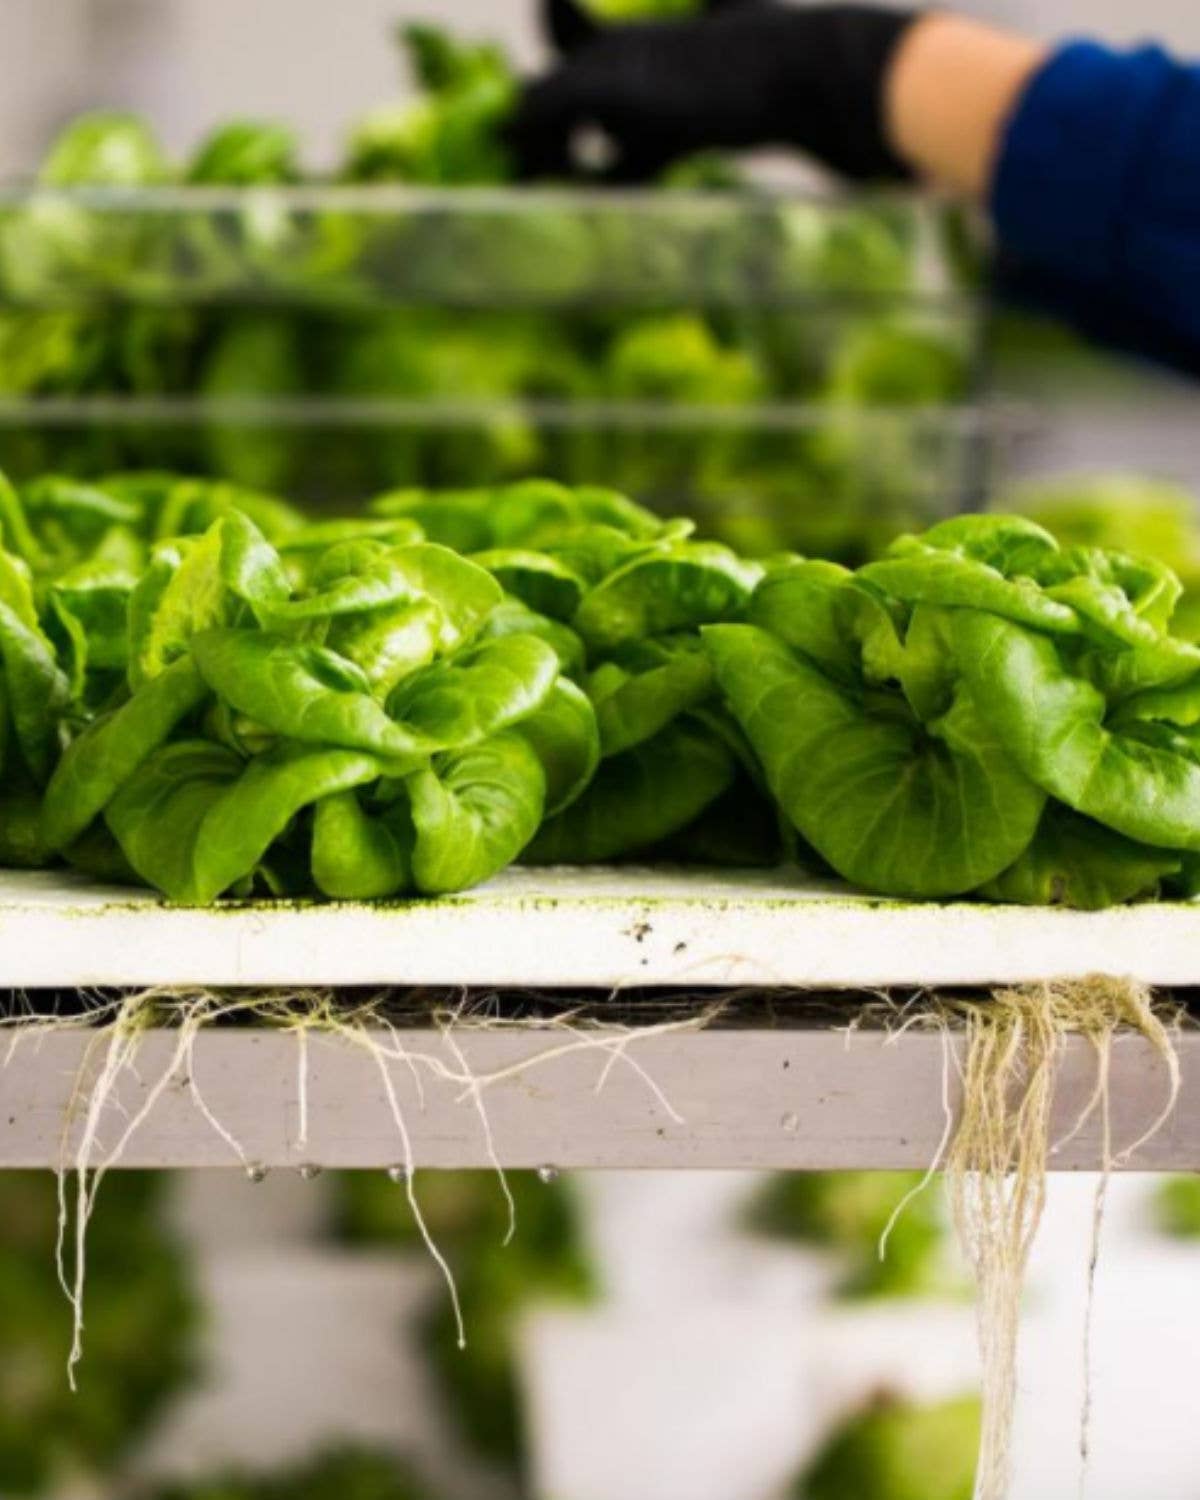 Could Indoor Farming Be the Future of Agriculture?